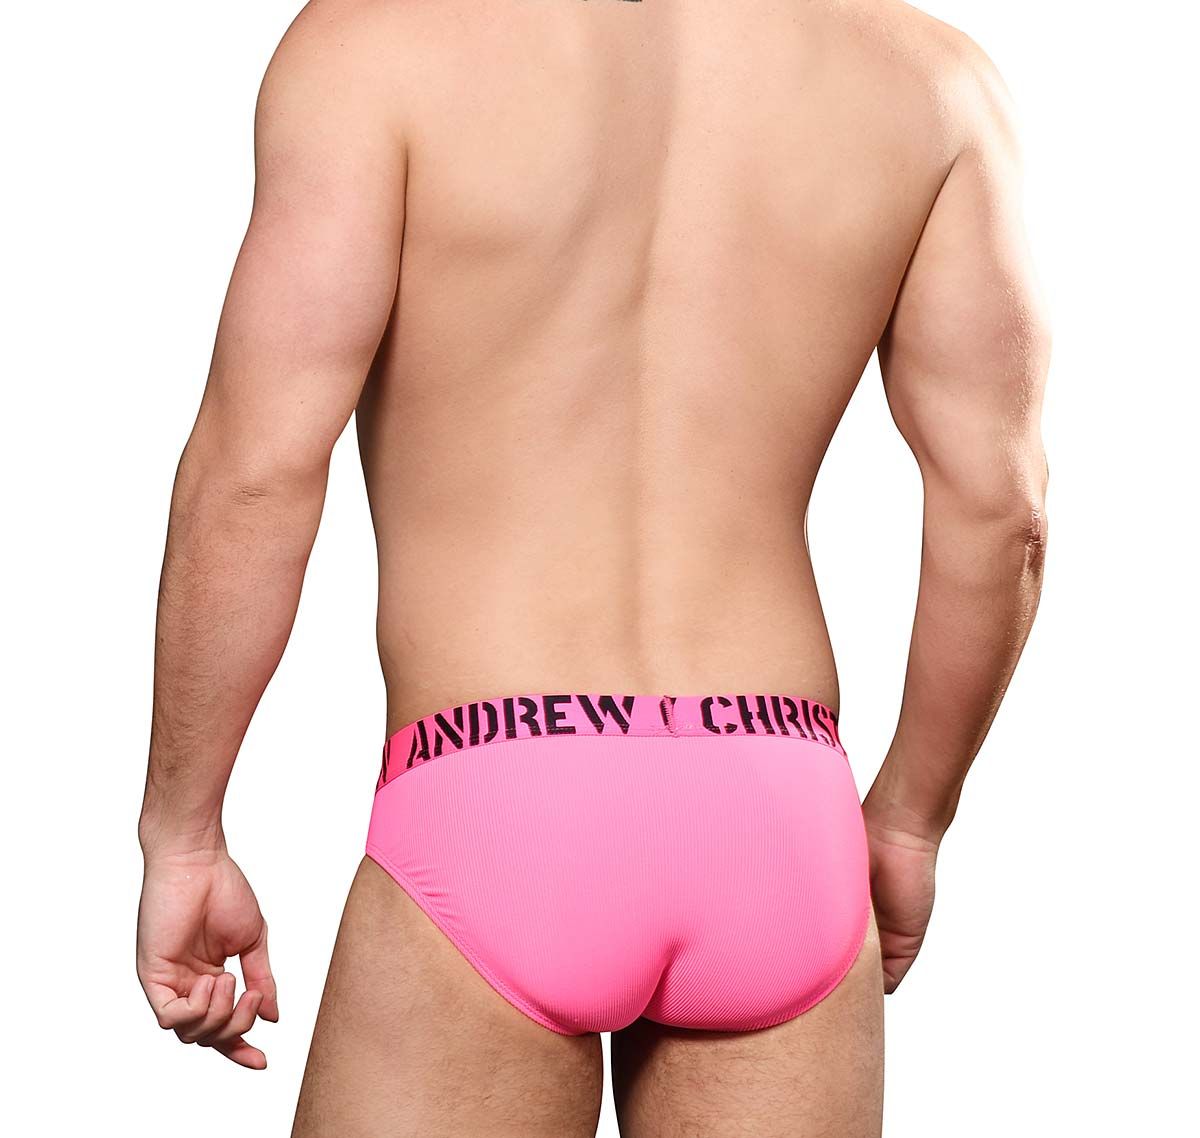 Andrew Christian Brief HOTNESS RIB BRIEF w/ ALMOST NAKED 92879, pink